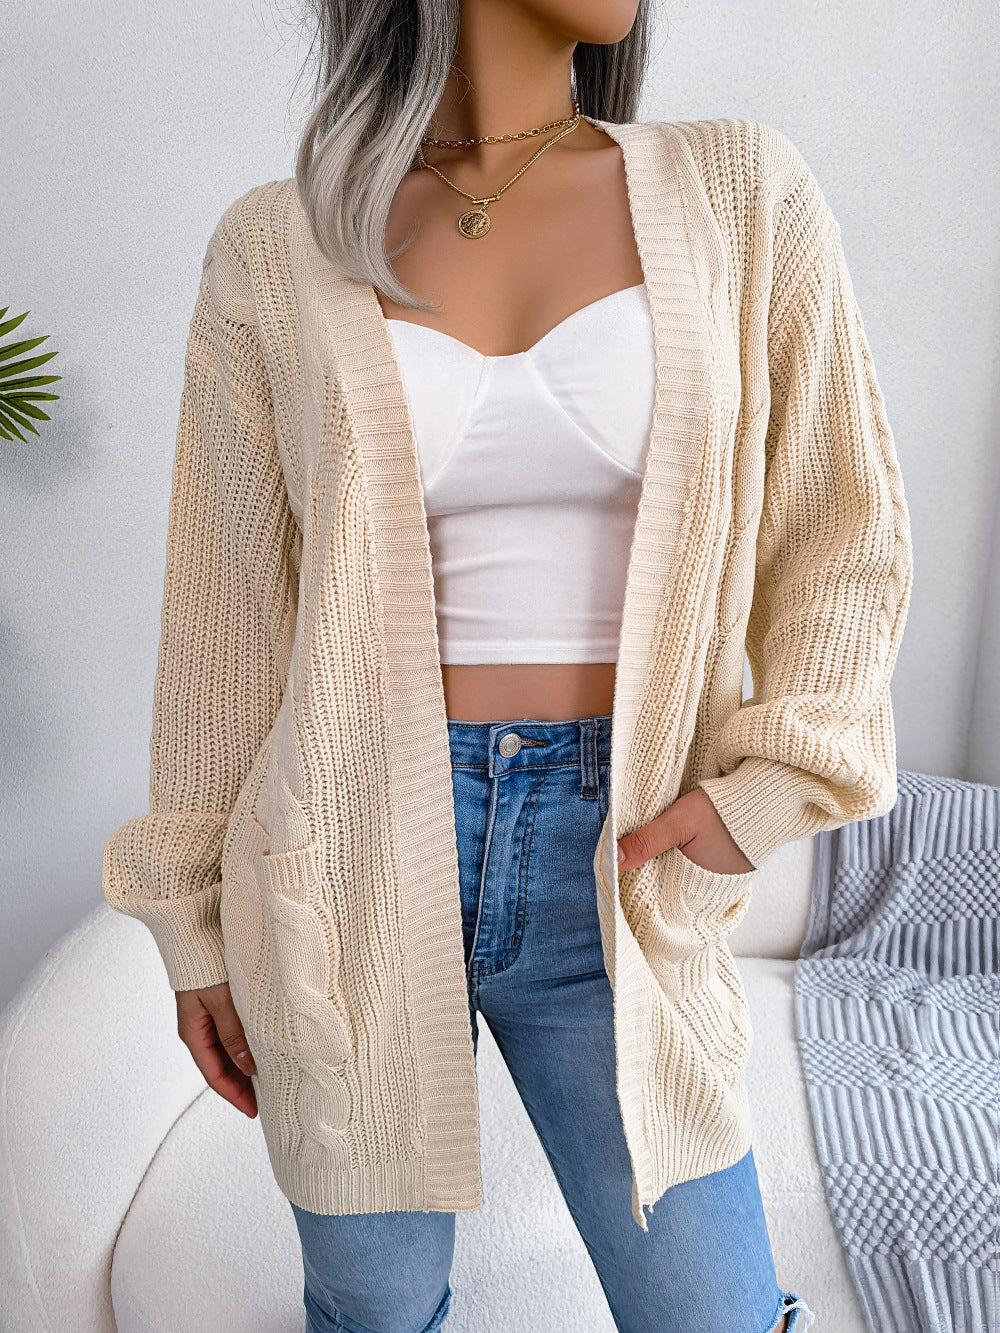 Trendsi Cupid Beauty Supplies Woman Cardigan Cable-Knit Open Front Pocketed Cardigan